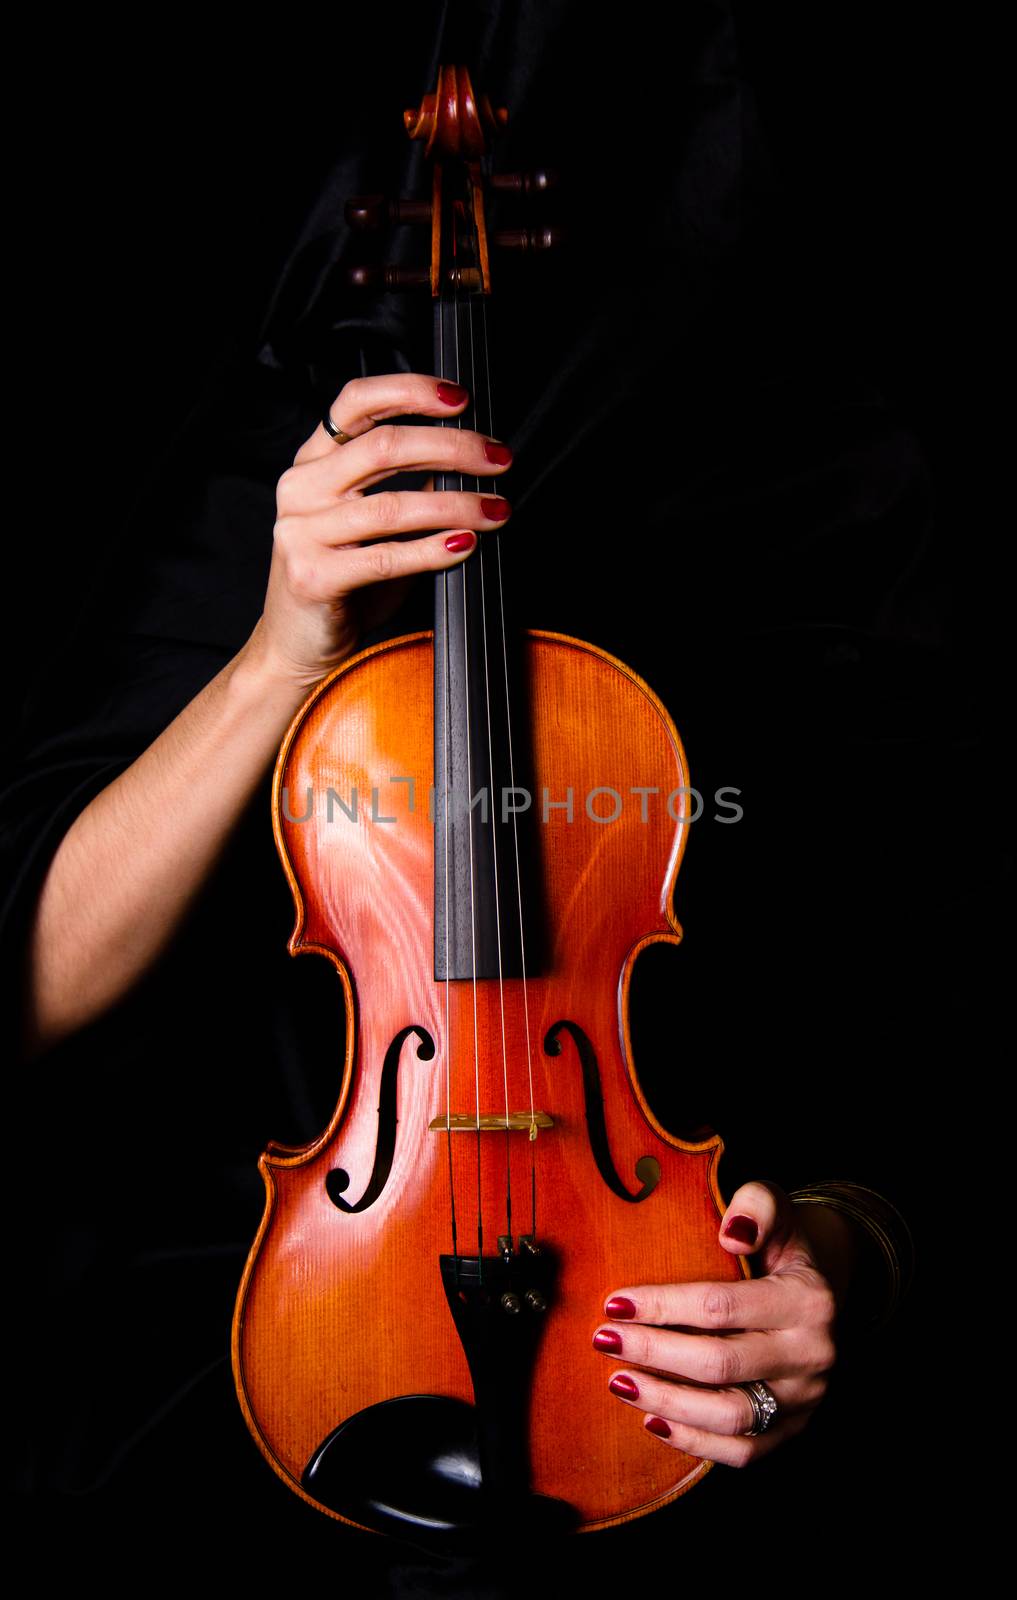 Female Violinist Holds Bow Across Saturated Musical Violin Acous by ChrisBoswell